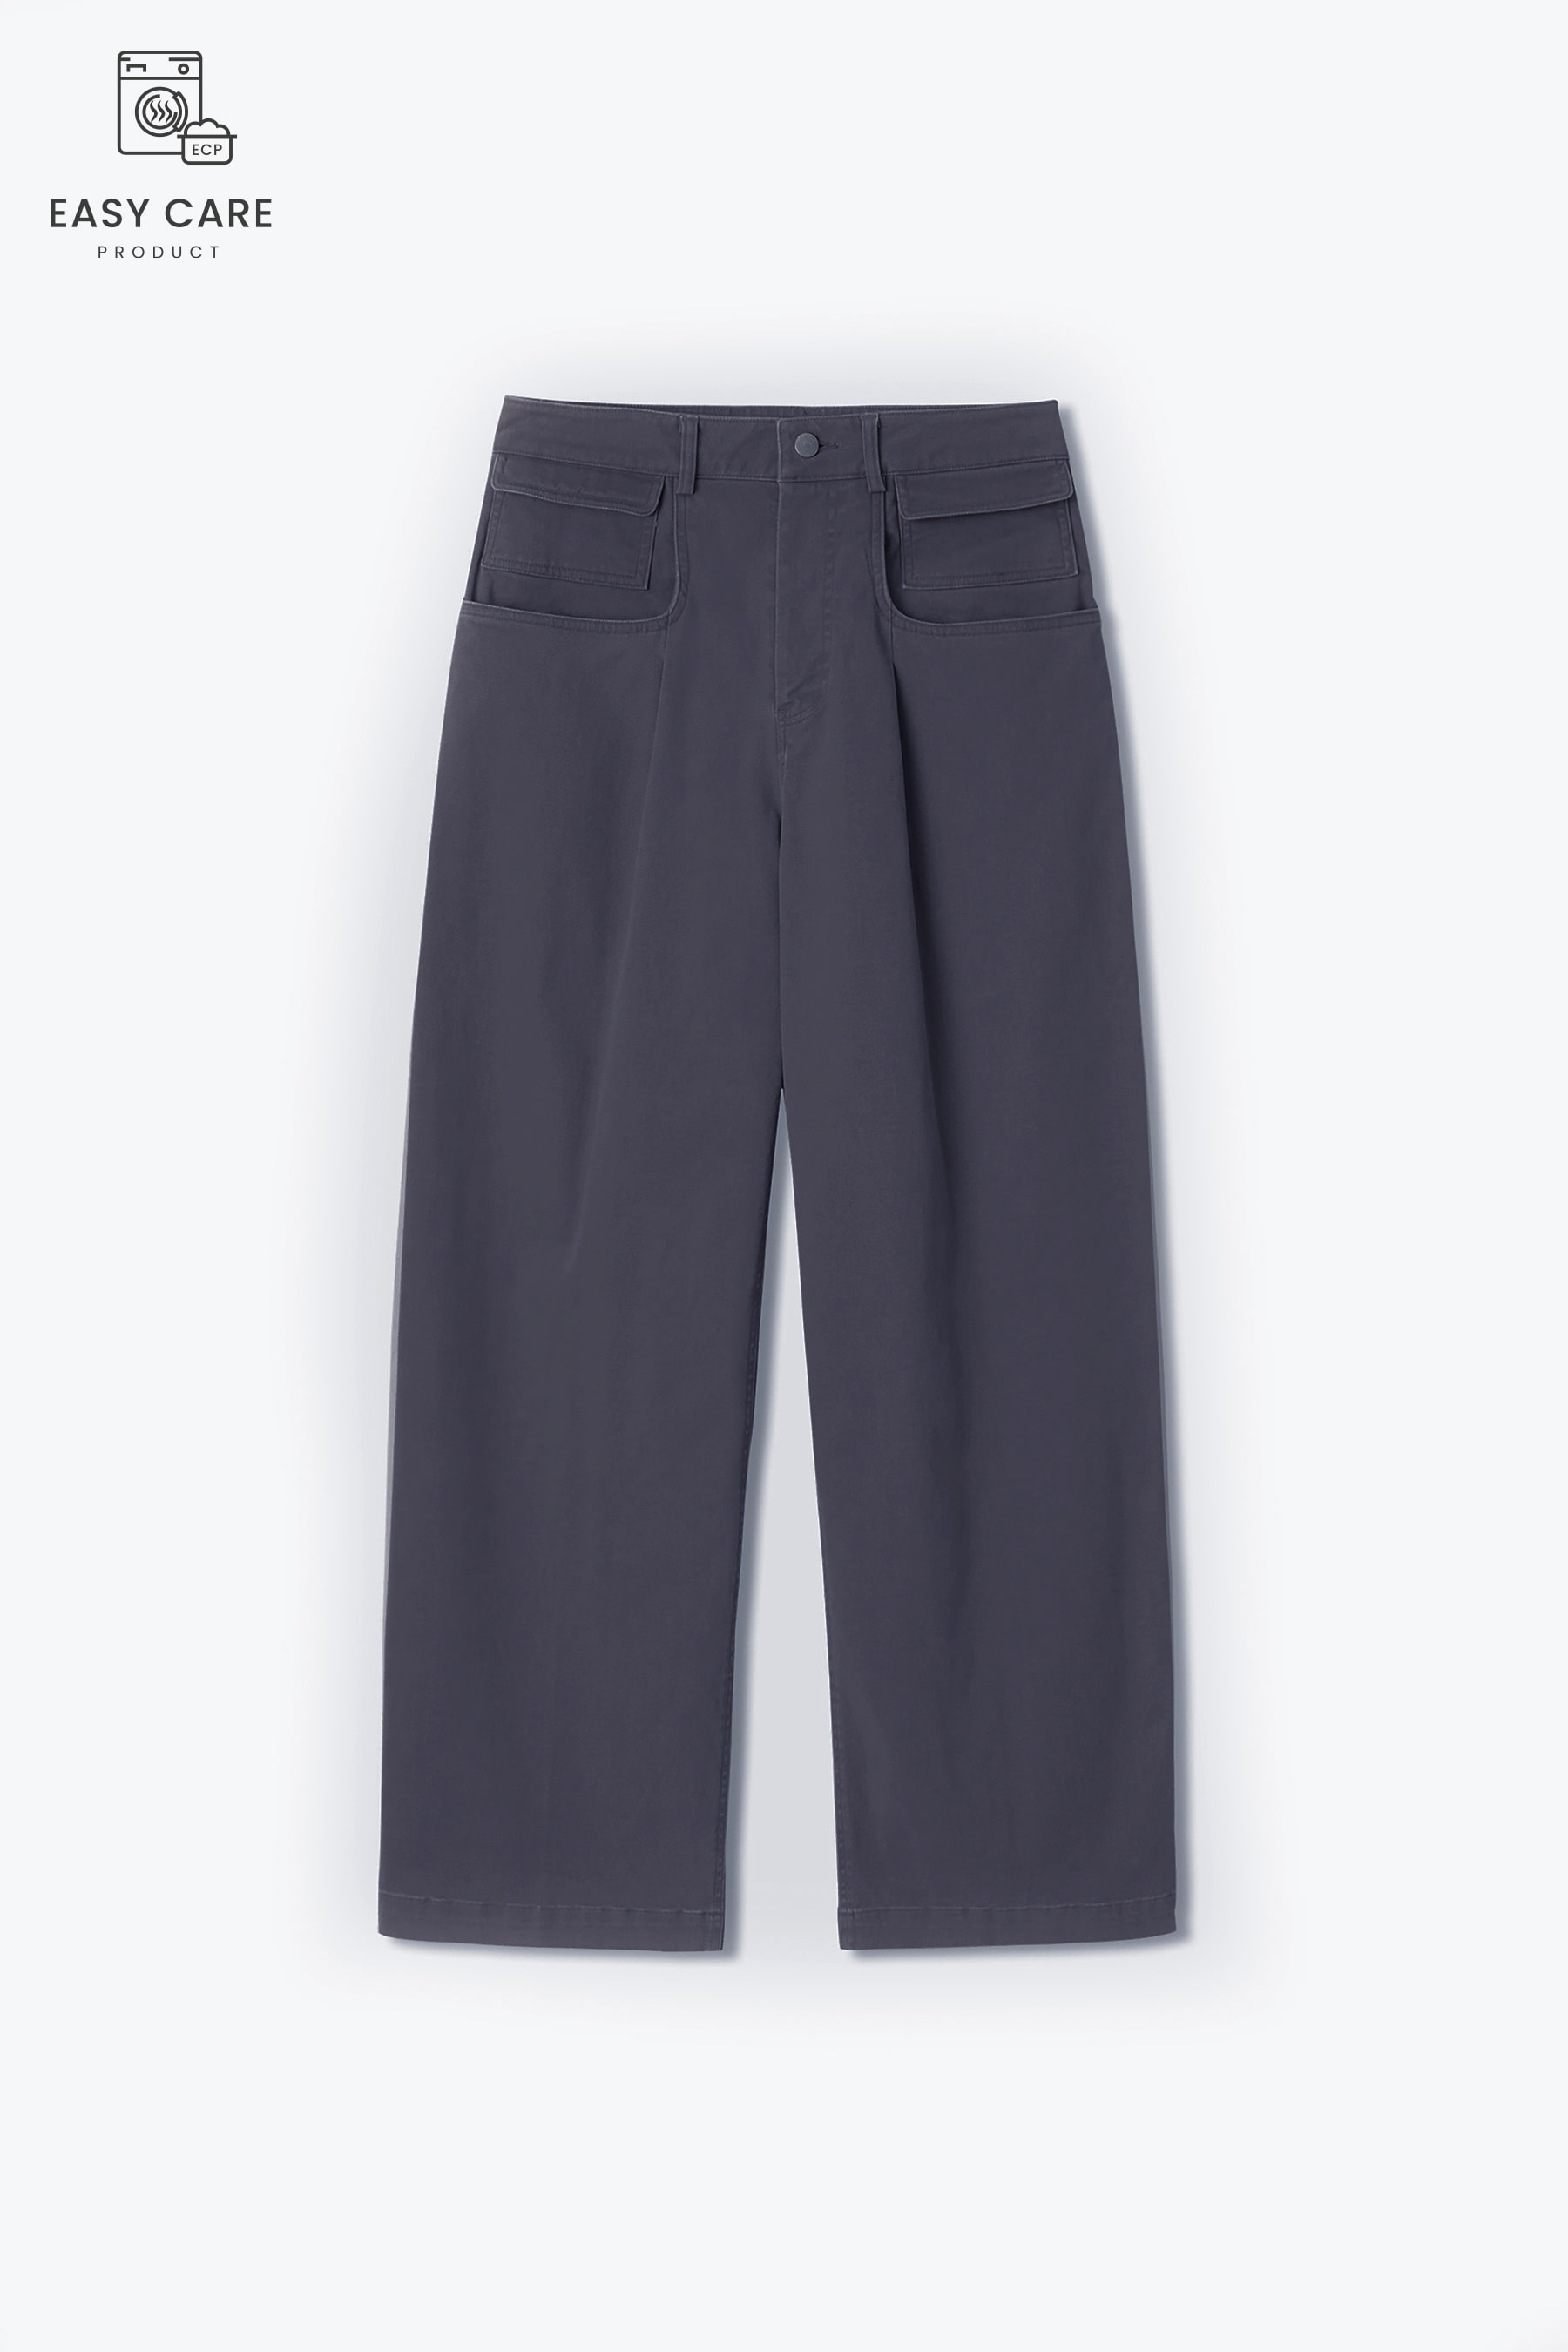 DUSTY BLUE ROLL UP FLEXIBLE(R.U.F) WIDE WASHED CHINO PANTS (ECP GARMENT PROCESS)